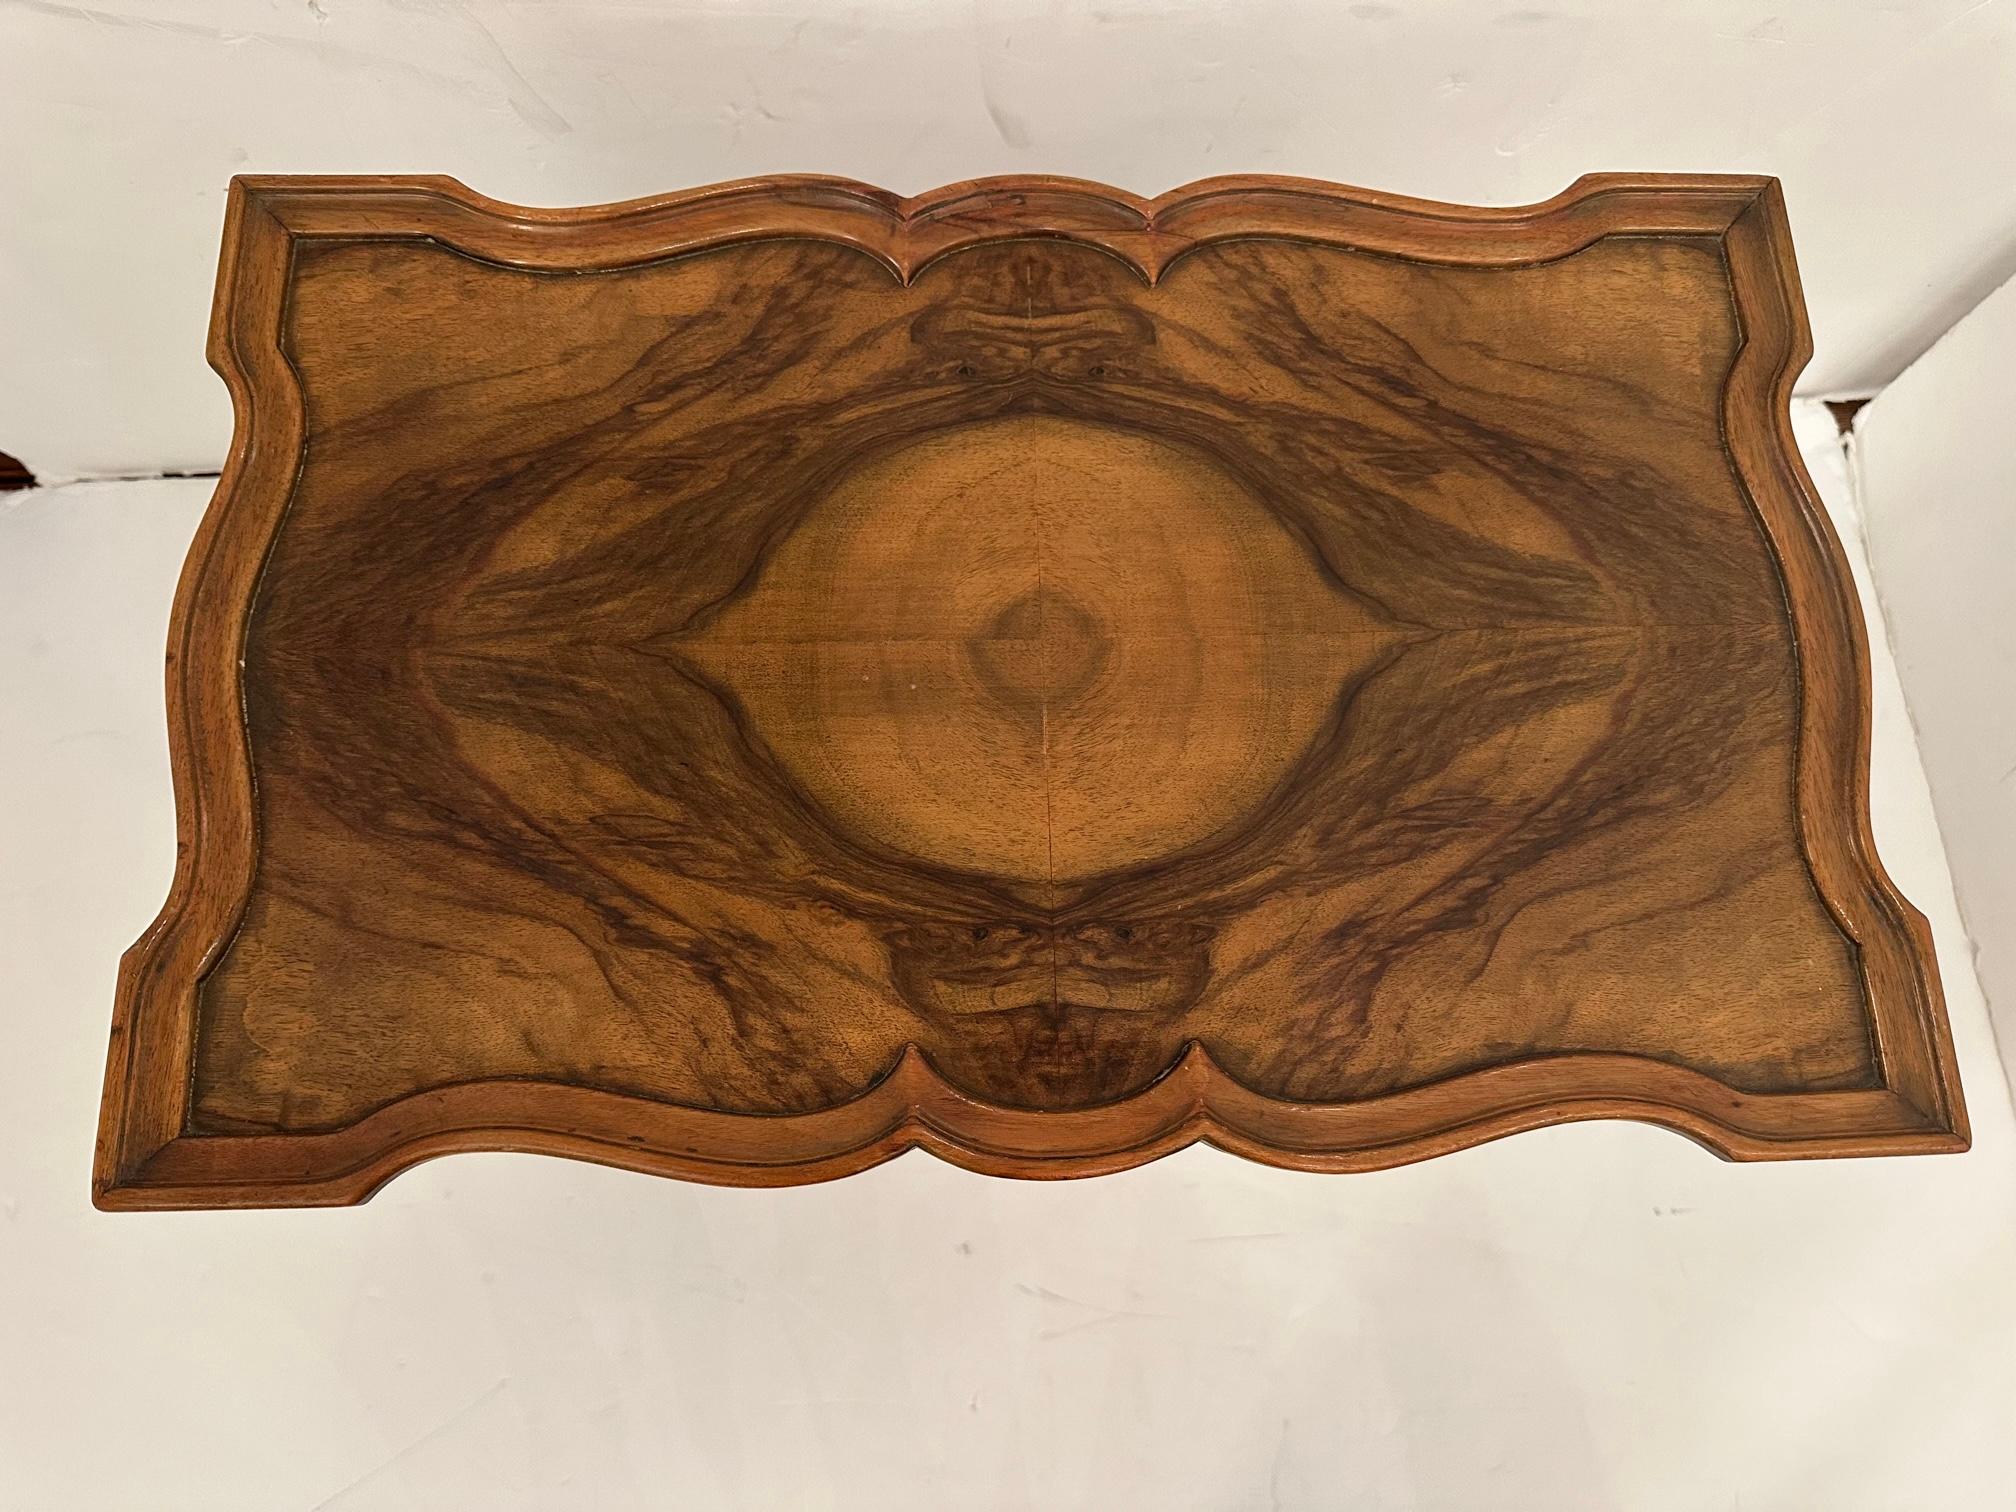 Great looking burled wood set of two nestings tables. The larger table measures 24” W x 15” D x 23” H and has beautiful pattern on top and scalloped wood gallery. The smaller table is 19.5” W x 12.25” D x 21.75” H and has a simple rectangular